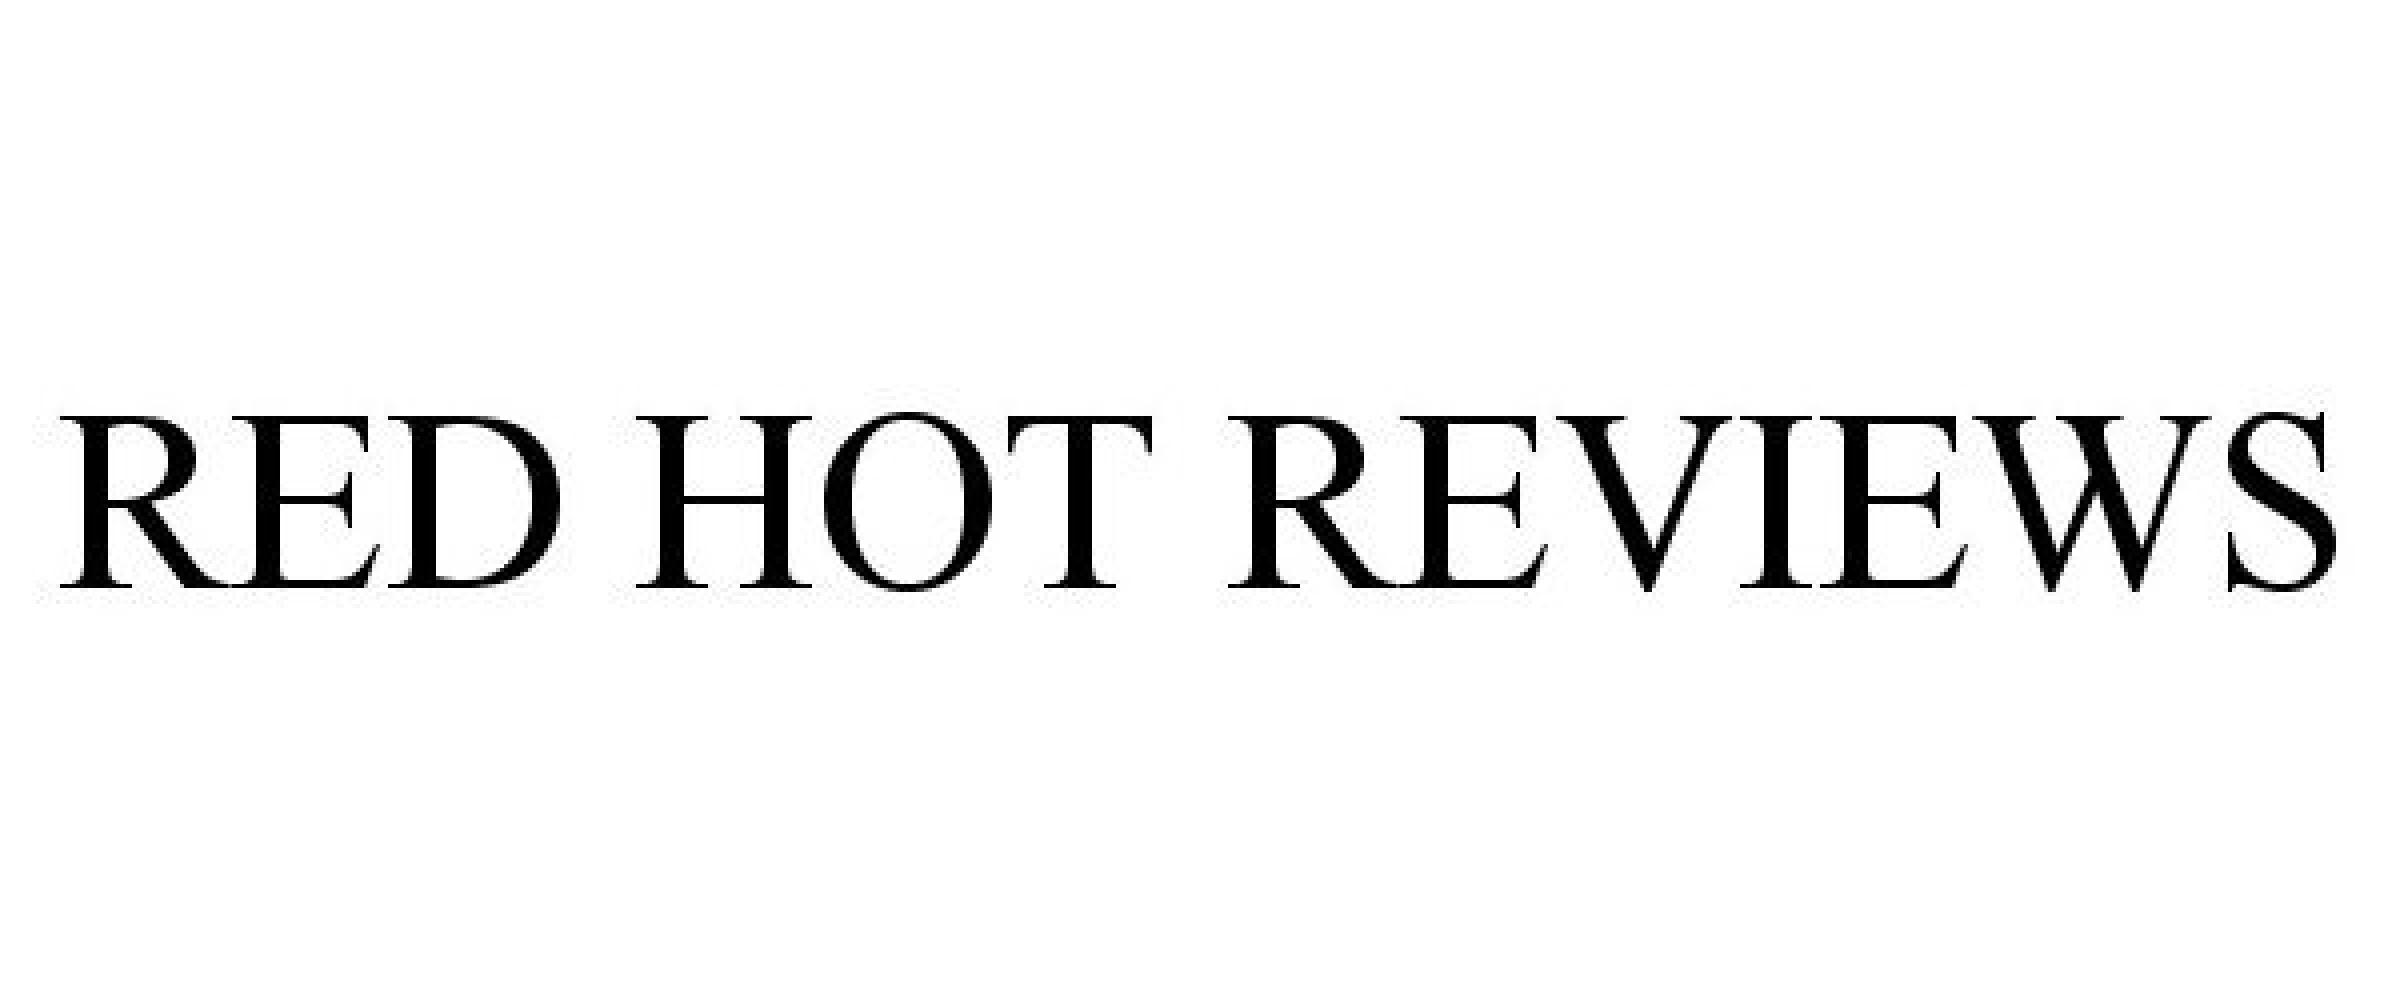  RED HOT REVIEWS